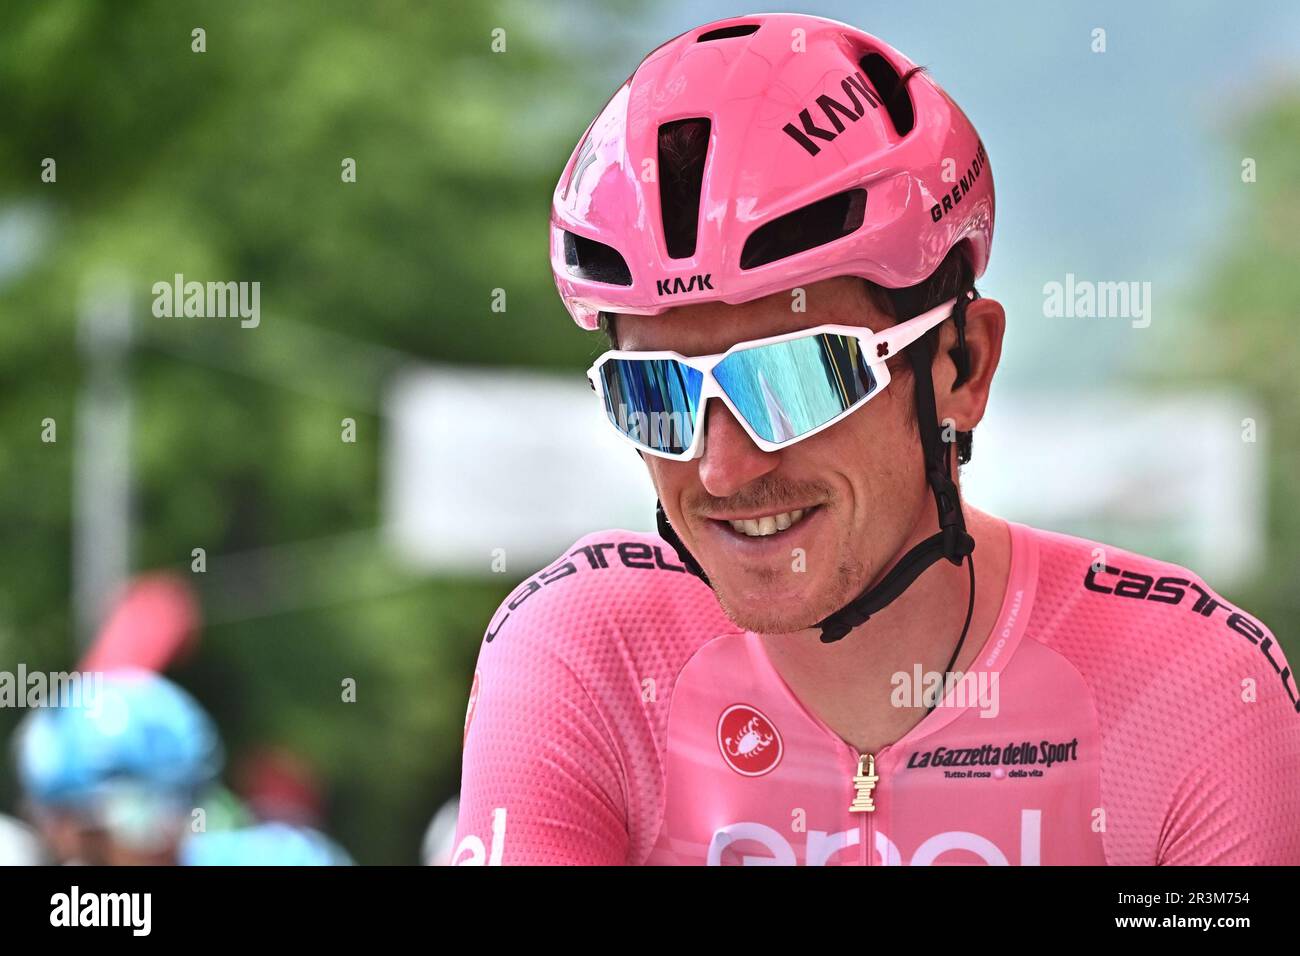 Pergine Valsugana, Italy. 24th May, 2023. May 24, 2023, PERGINE VALSUGANA,  ITALY: British rider Geraint Thomas of Ineos Grenadiers team wearing the  overall leader's pink jersey, waiting on the start line the